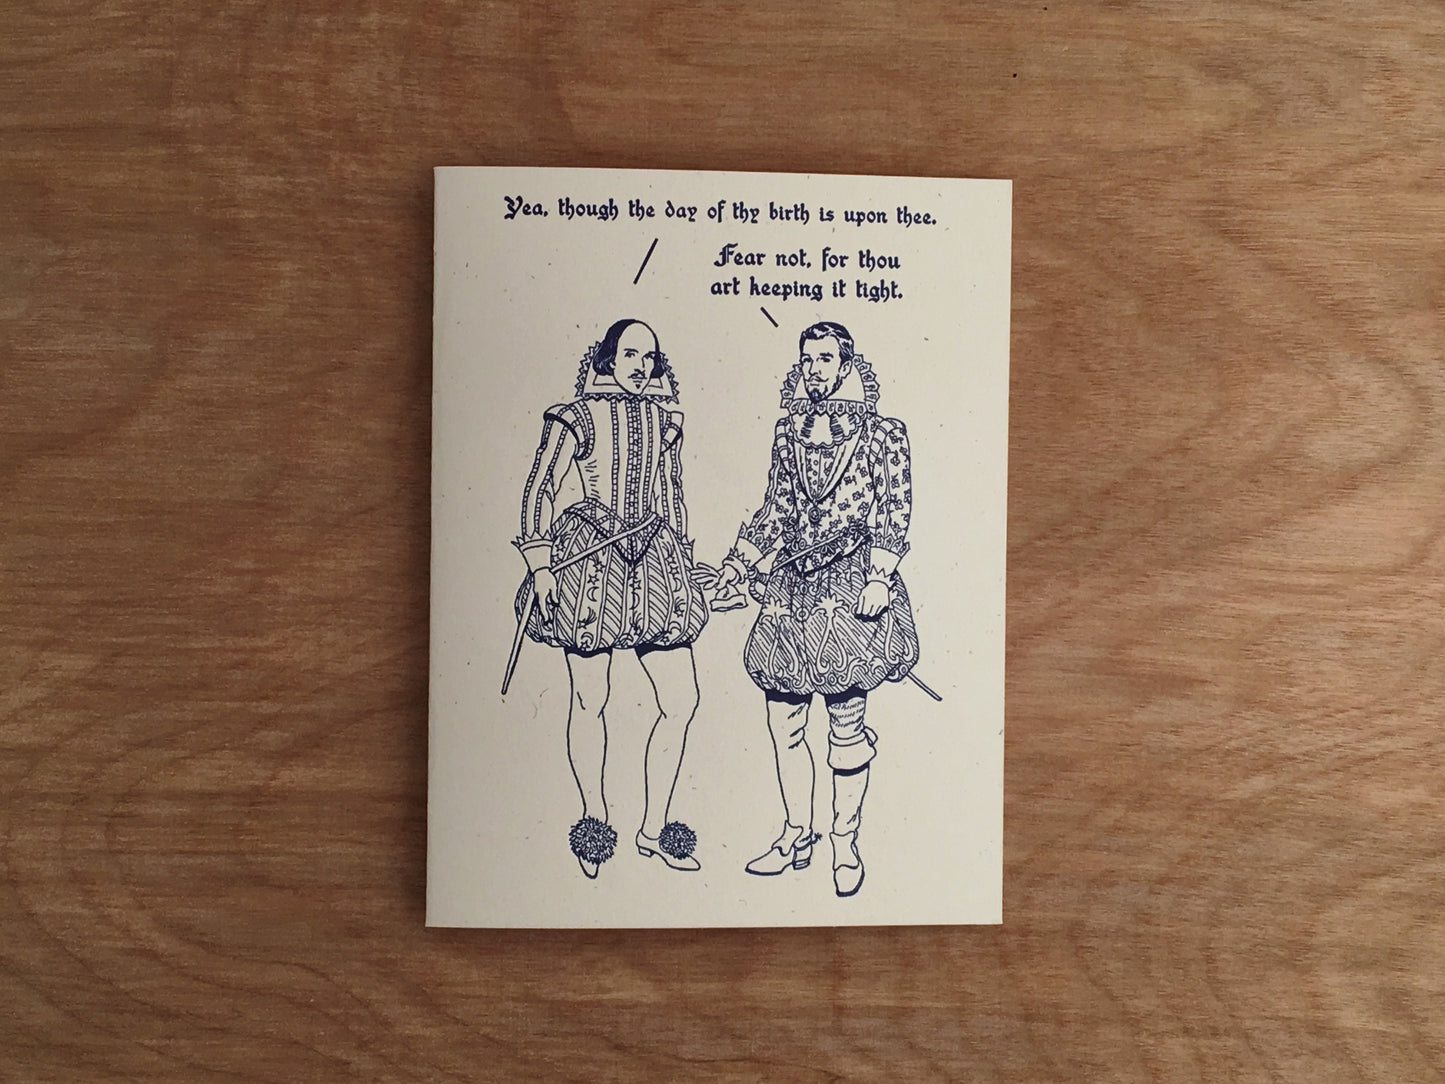 Britches and Hose: Keeping It Tight. Shakespeare Letterpress Birthday Greeting Card.